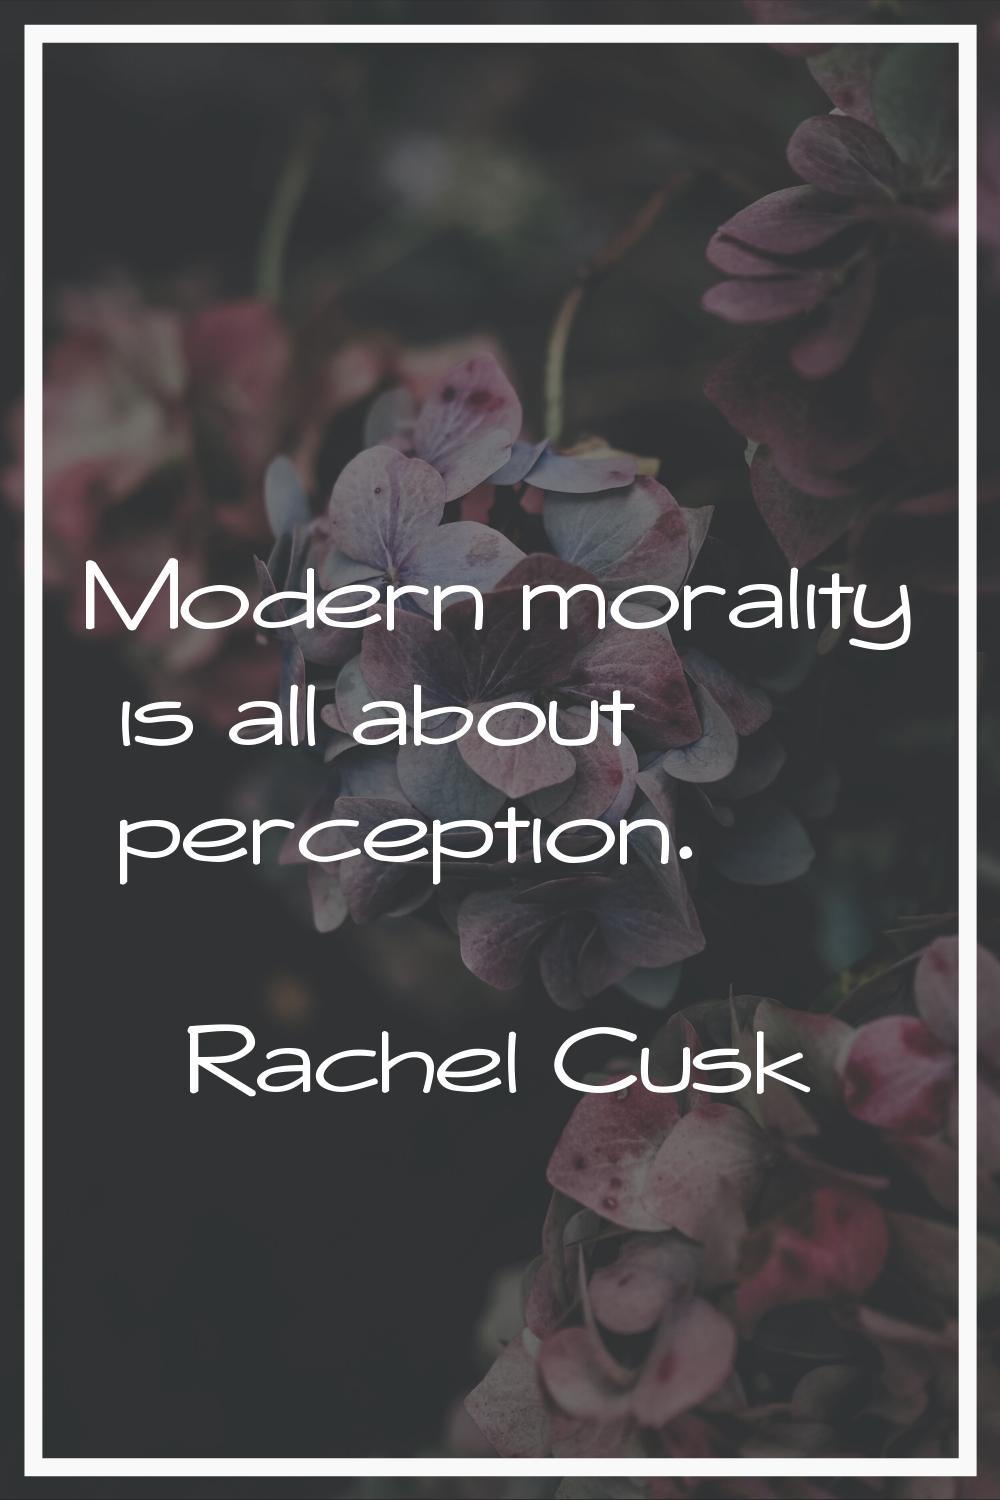 Modern morality is all about perception.